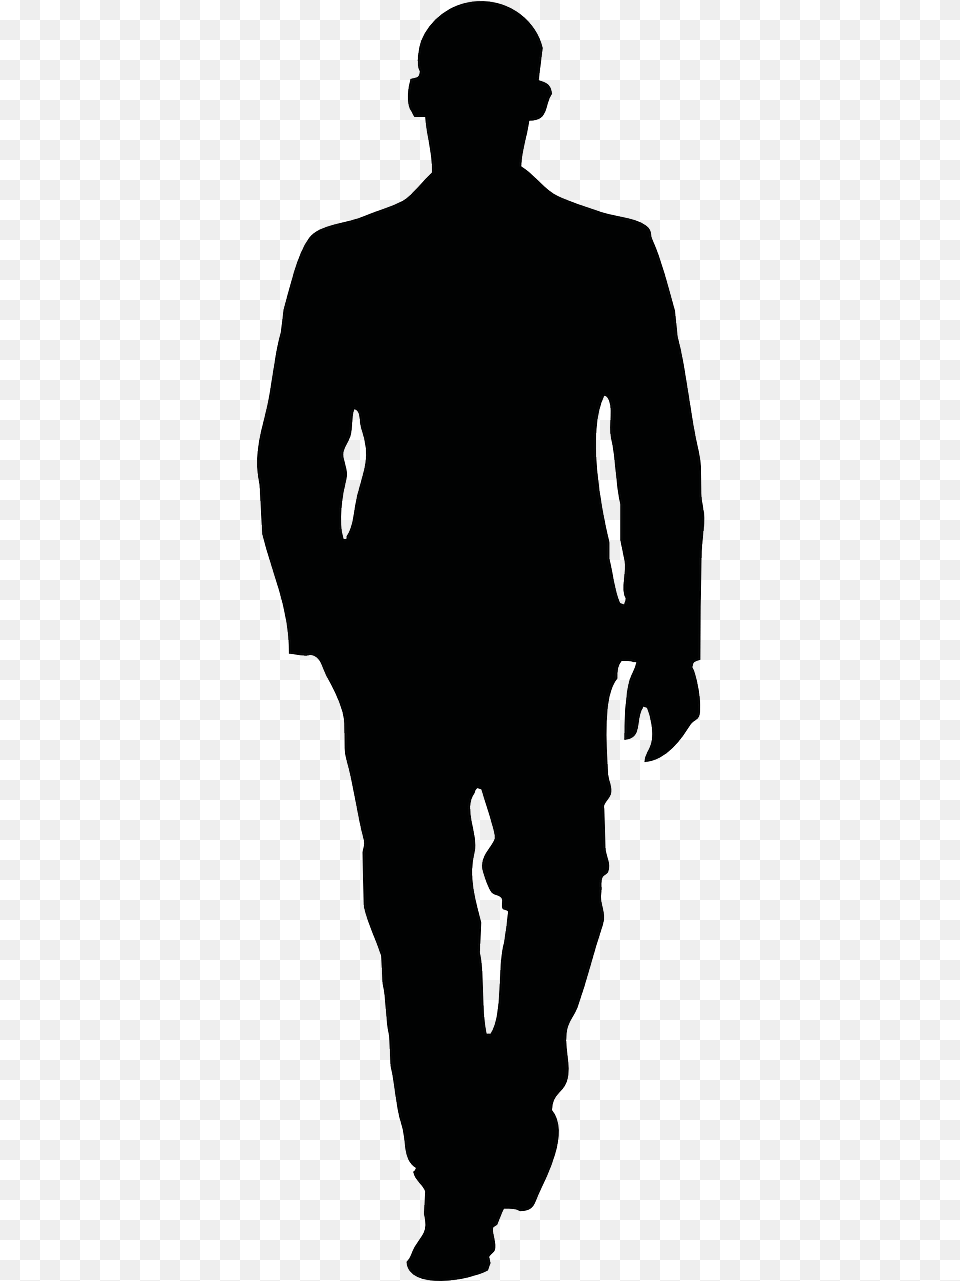 Clip Art Silhouette Walking Vector Graphics Person Walking Forward Silhouette, Adult, Male, Man, Head Png Image